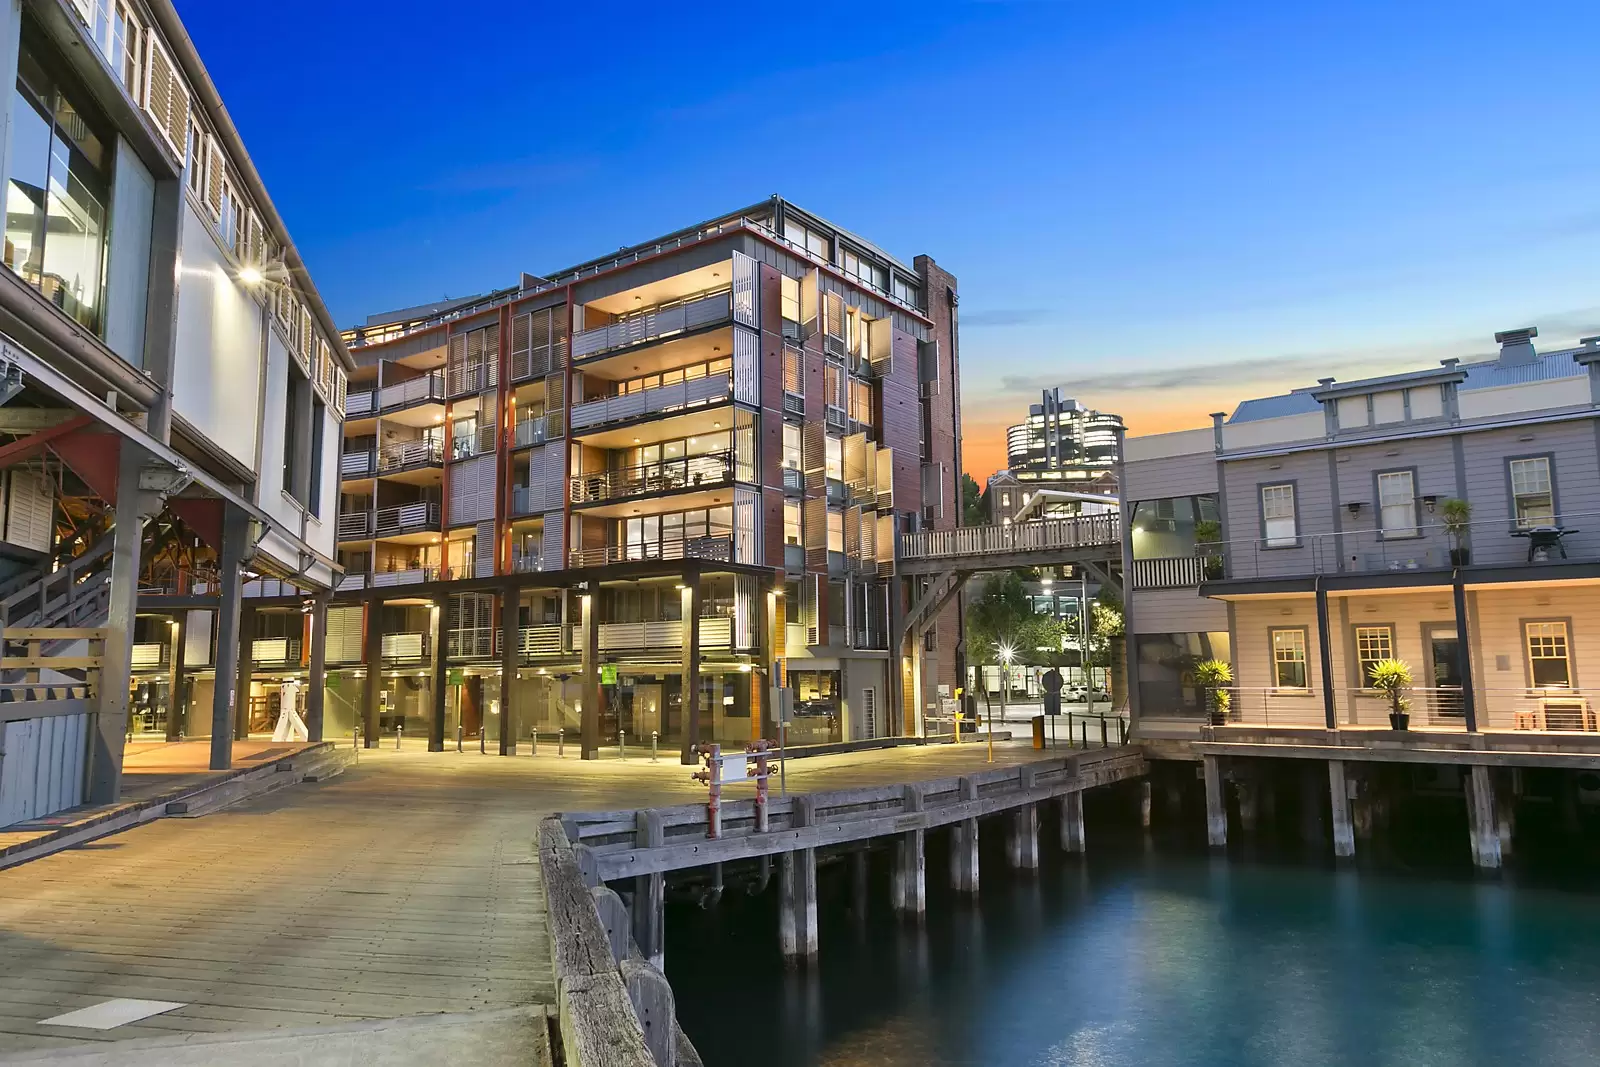 Photo #10: 401/21a Hickson Road, Walsh Bay - Sold by Sydney Sotheby's International Realty